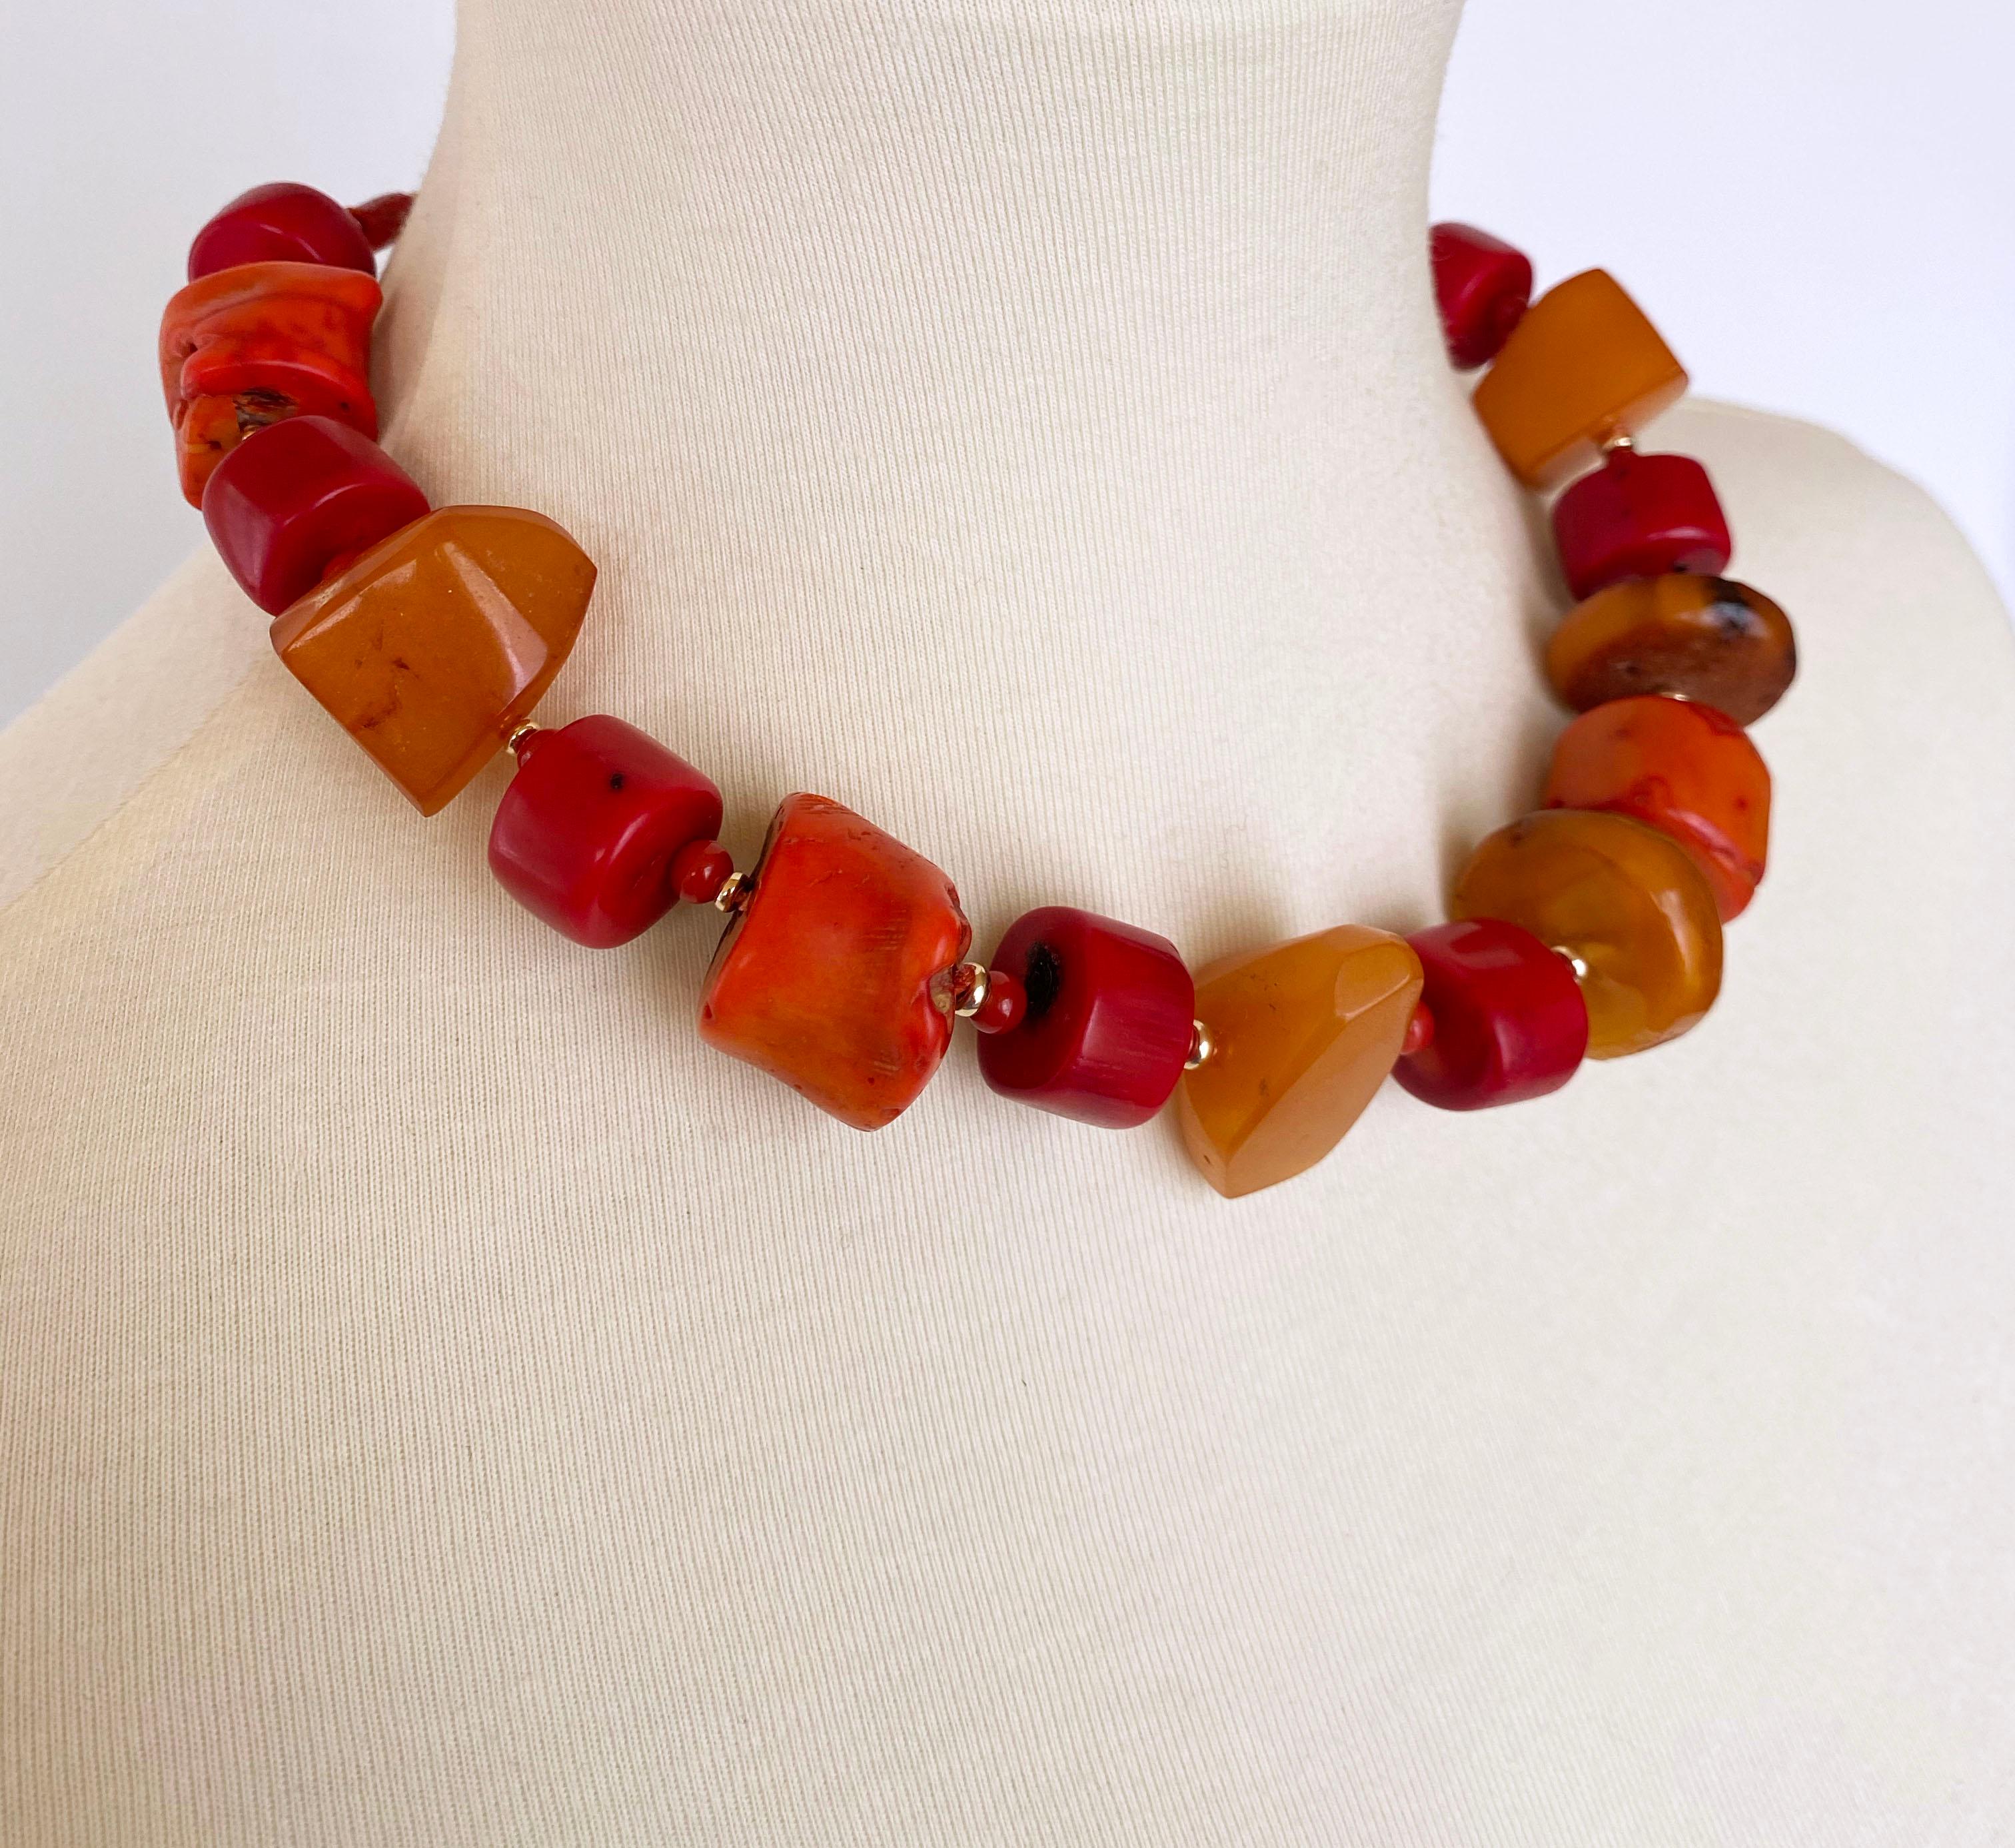 This vibrant and loud necklace features beautiful multi shade Corals and Amber which display radiant tones of Red, Orange, Yellow and Gold. Perfectly accented by small 14K Yellow Gold beads, this necklace also meets at a simple 14K Yellow Gold